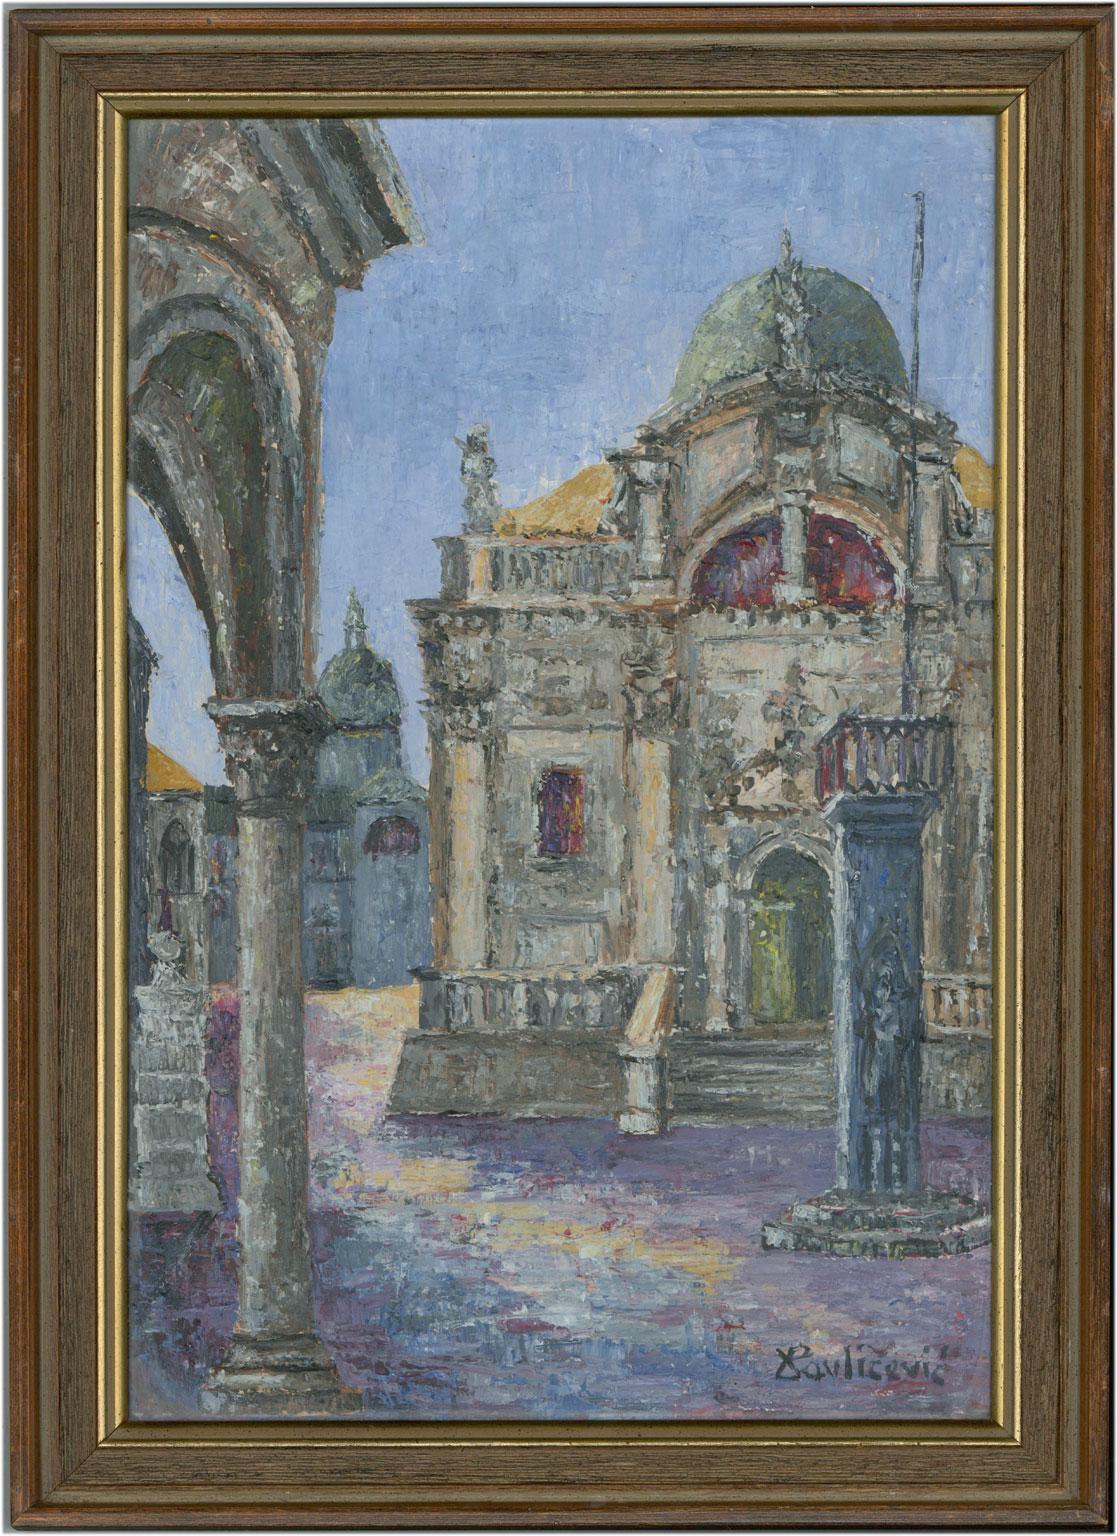 An oil on card painting depicting a view of a courtyard with a church and other buildings. Presented in a distressed frame with a wood and gilt finish. Signed.